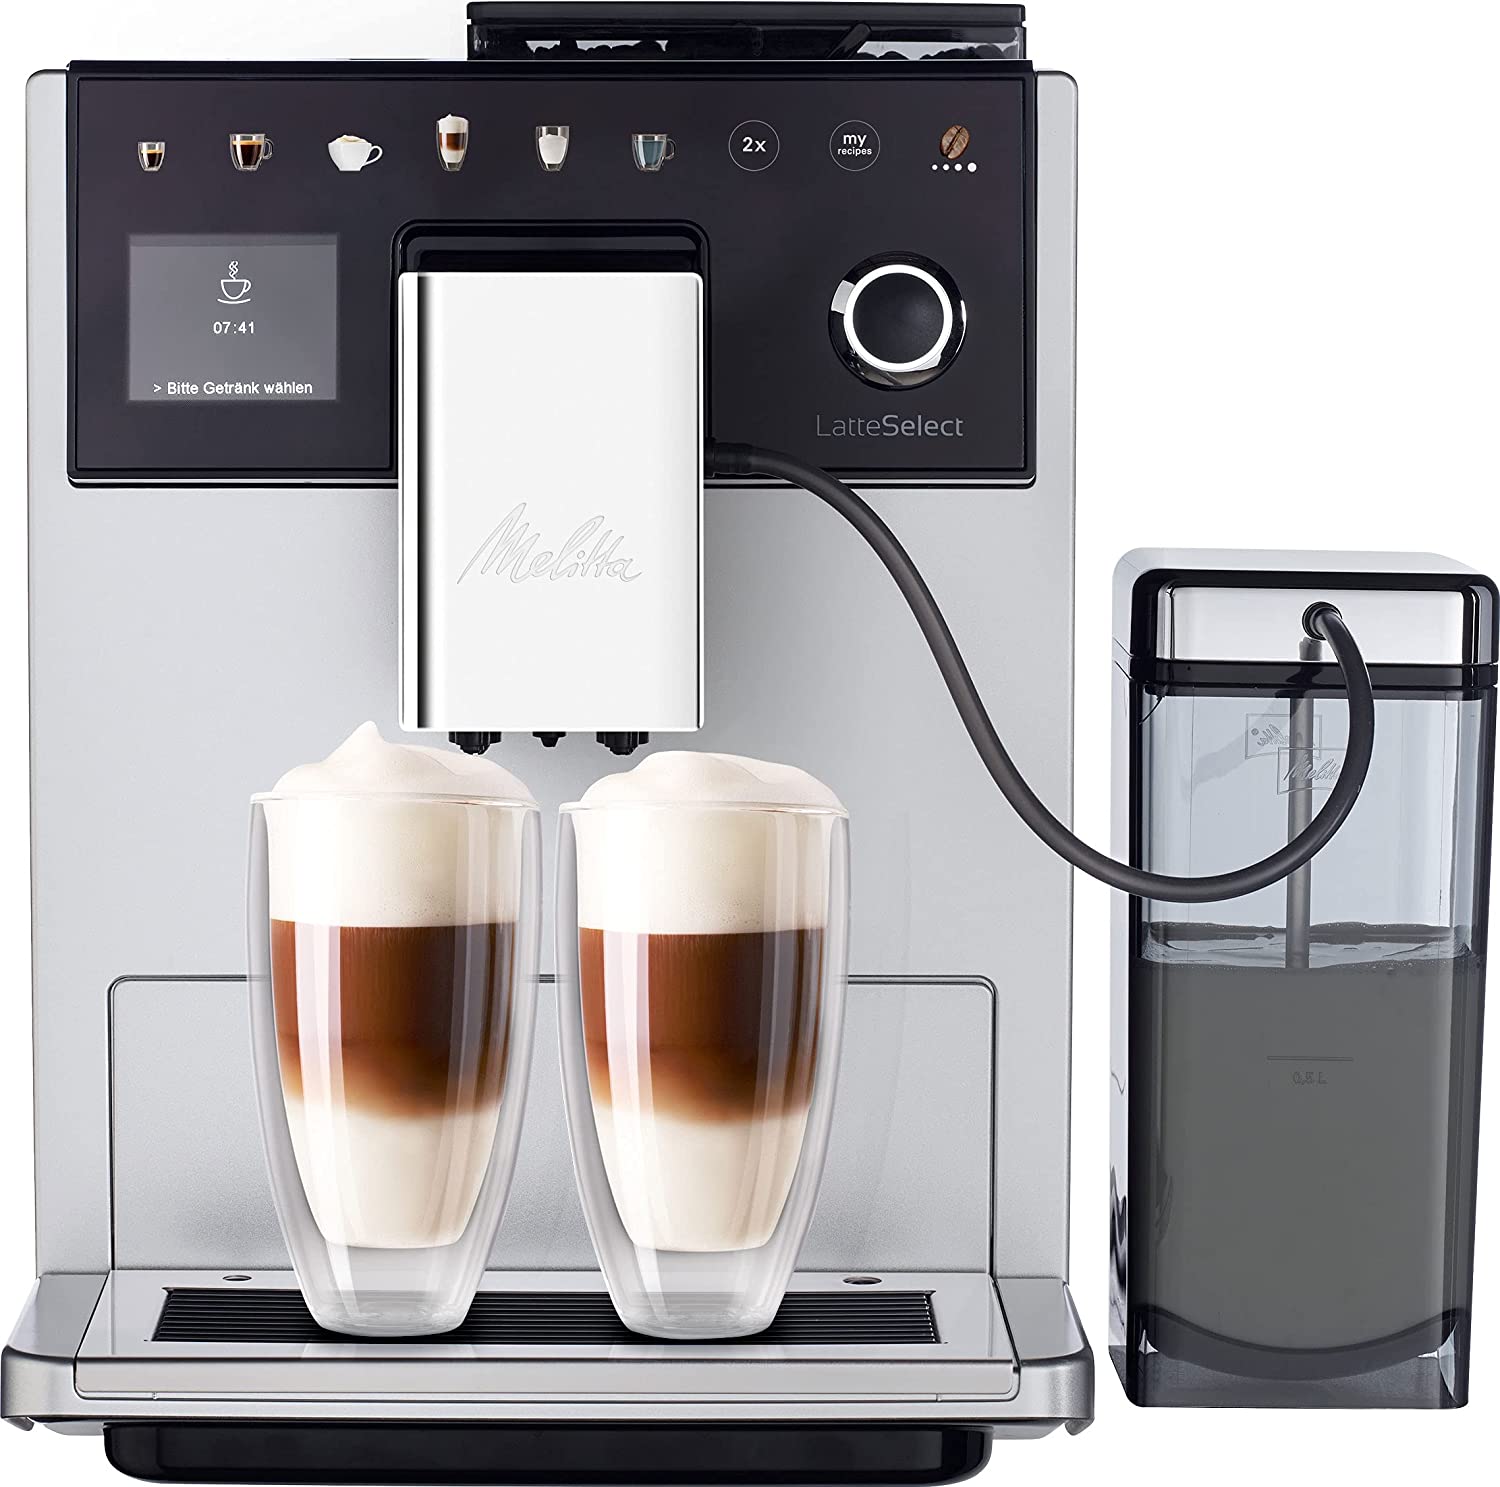 Melitta Latte Select F 630-201 Fully Automatic Coffee Machine with Milk System, Whisper-Quiet Grinder, Touch Function, 12 Coffee Specialities and 2 Bean Containers, Silver